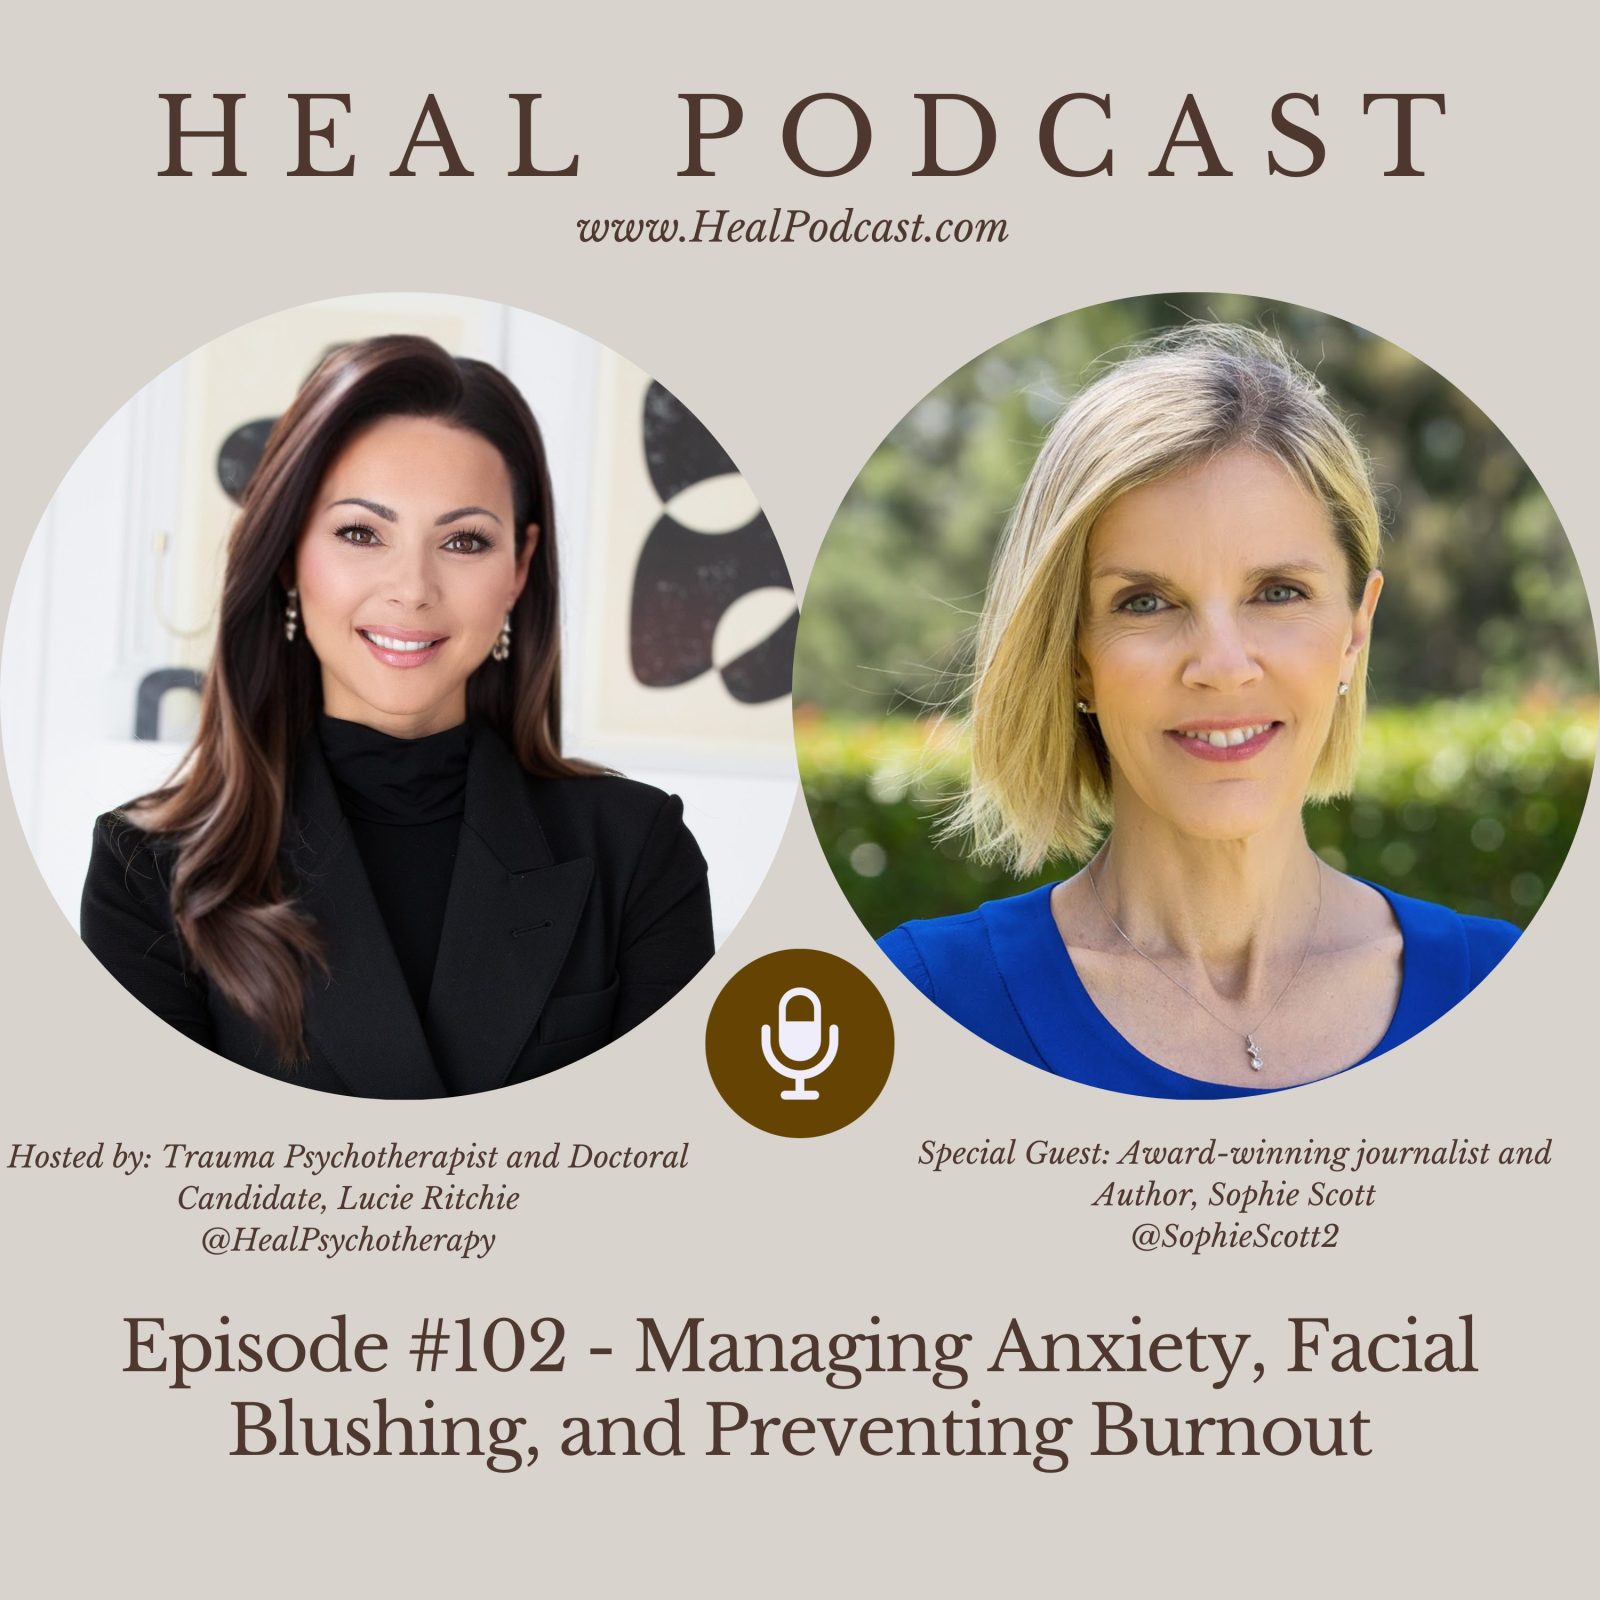 Sophie Scott sits with Lucie Ritchie to talk about high-functioning anxiety, the nervous system, and how to prevent burnout.